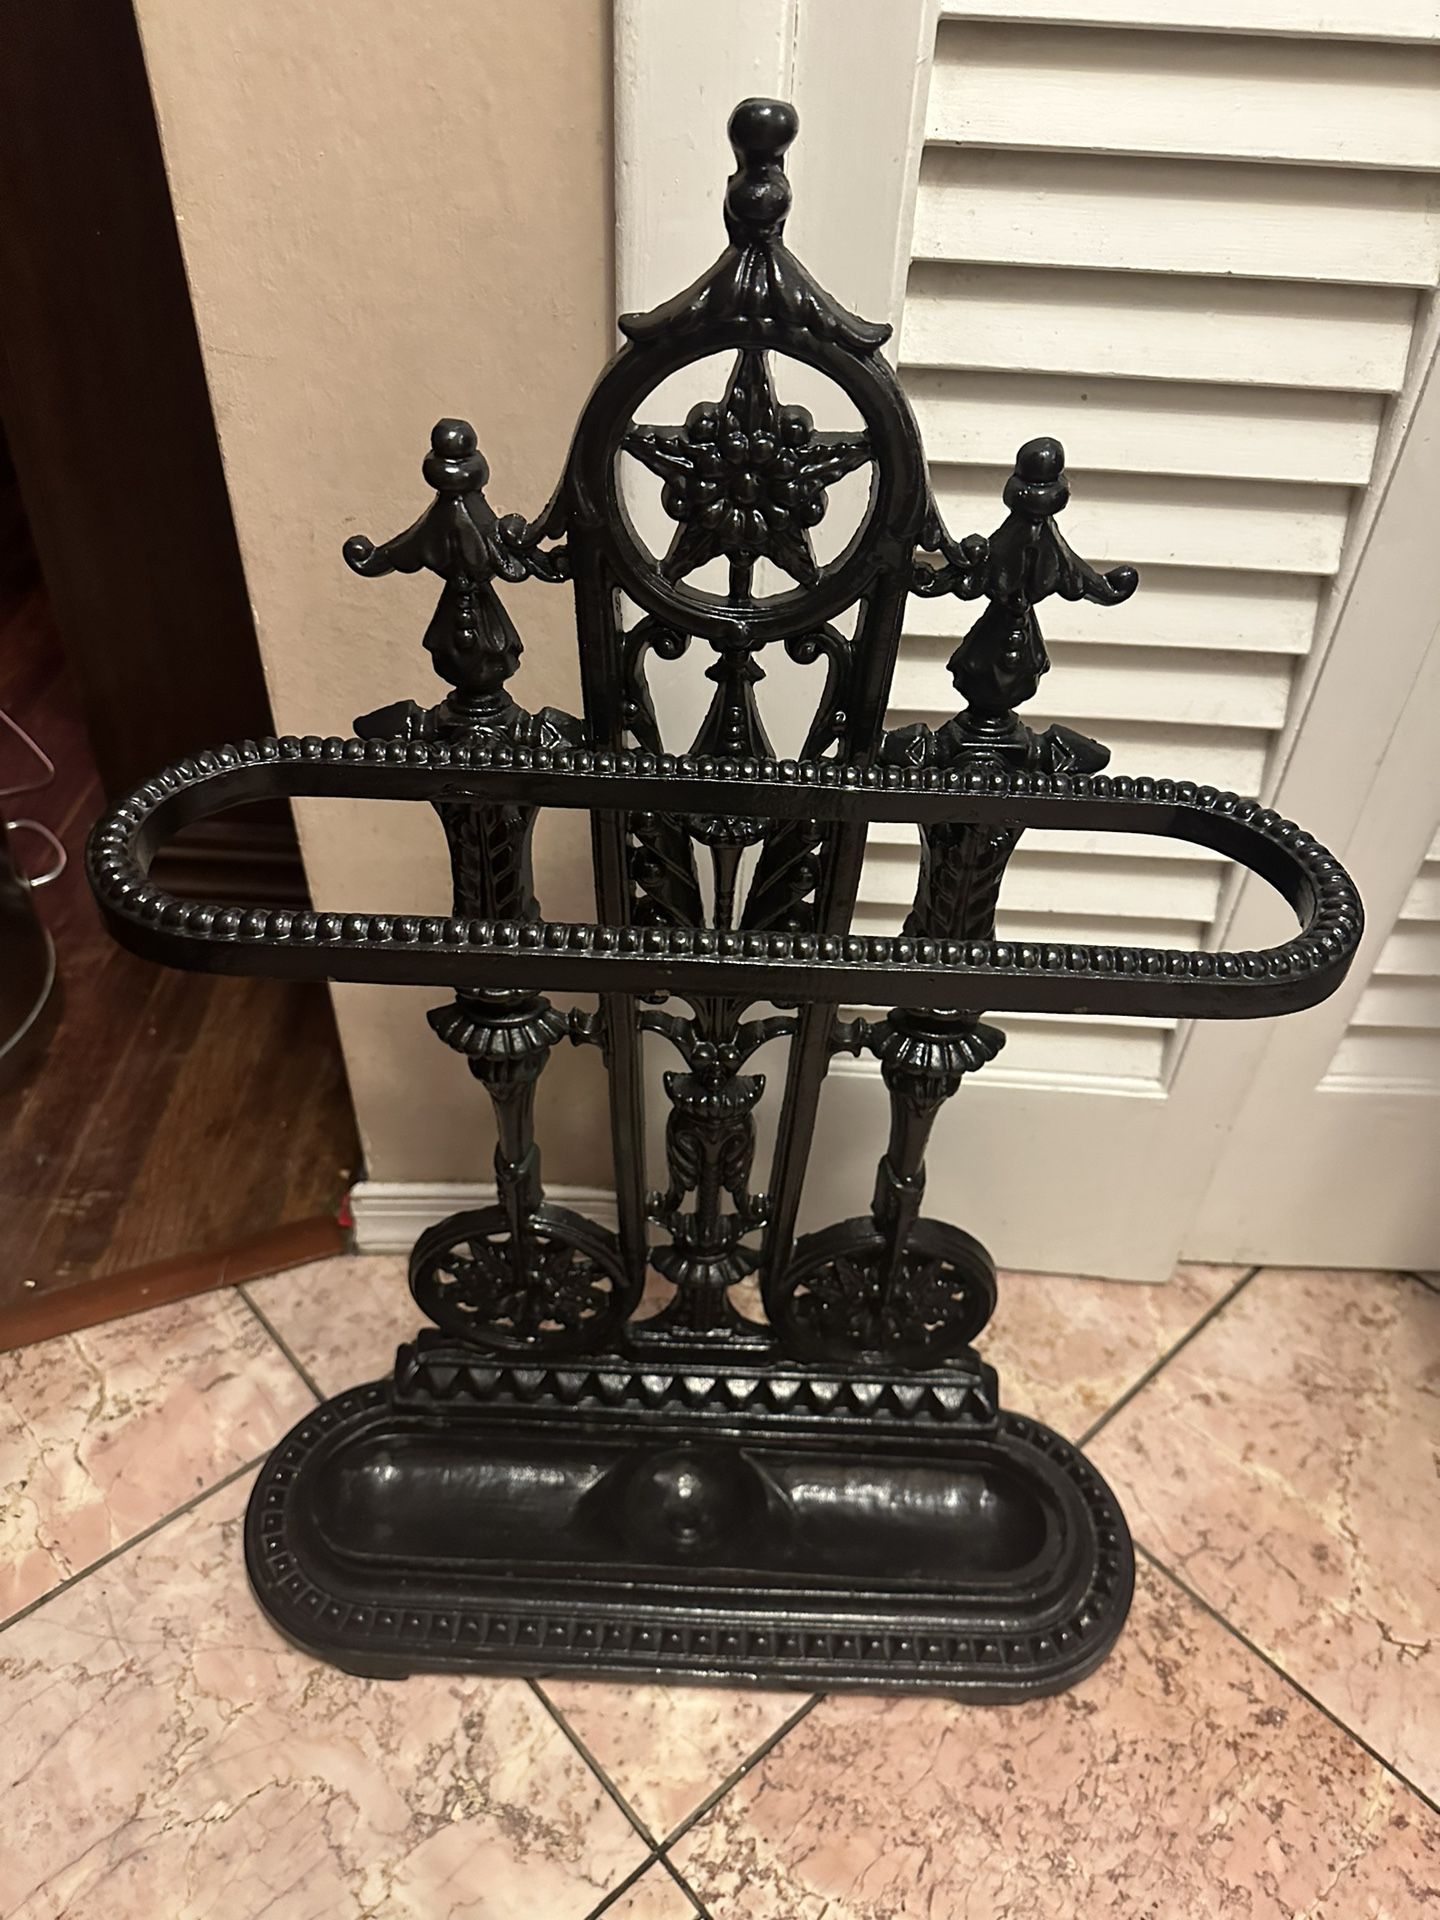 Pre-owned Cast Iron Umbrella Stand Rack With Drip Tray